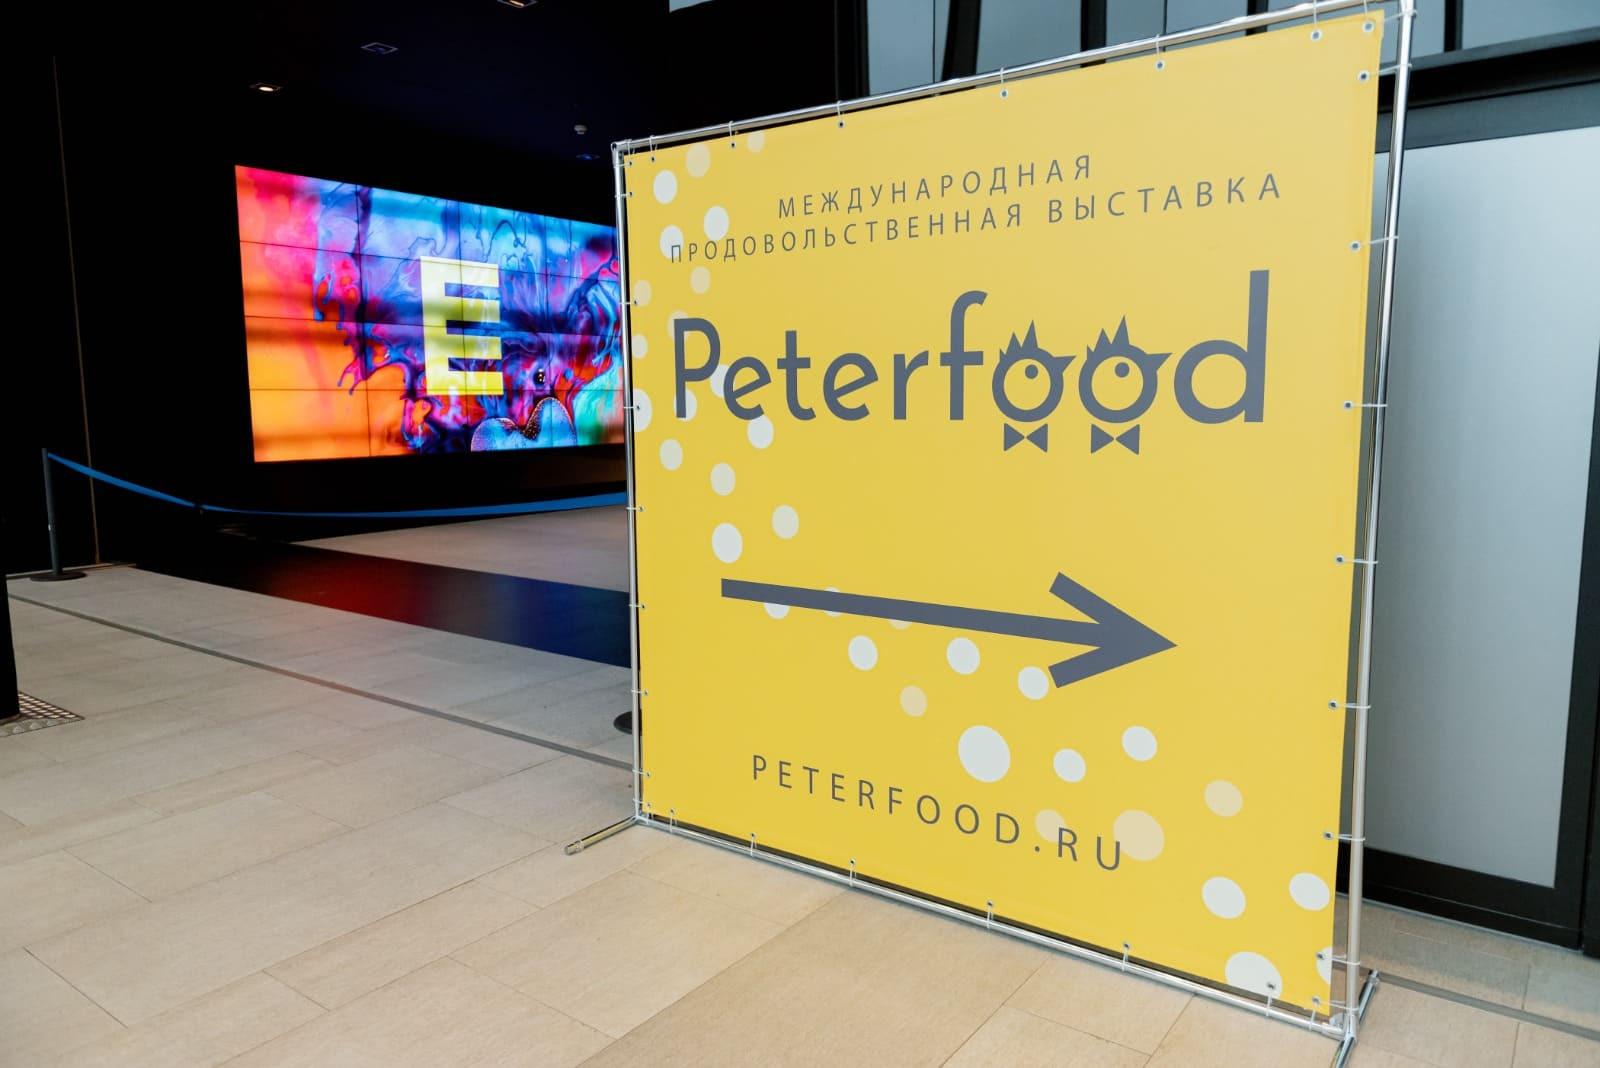 Peterfood-2023: innovations and international cooperation at the Russian food exhibition